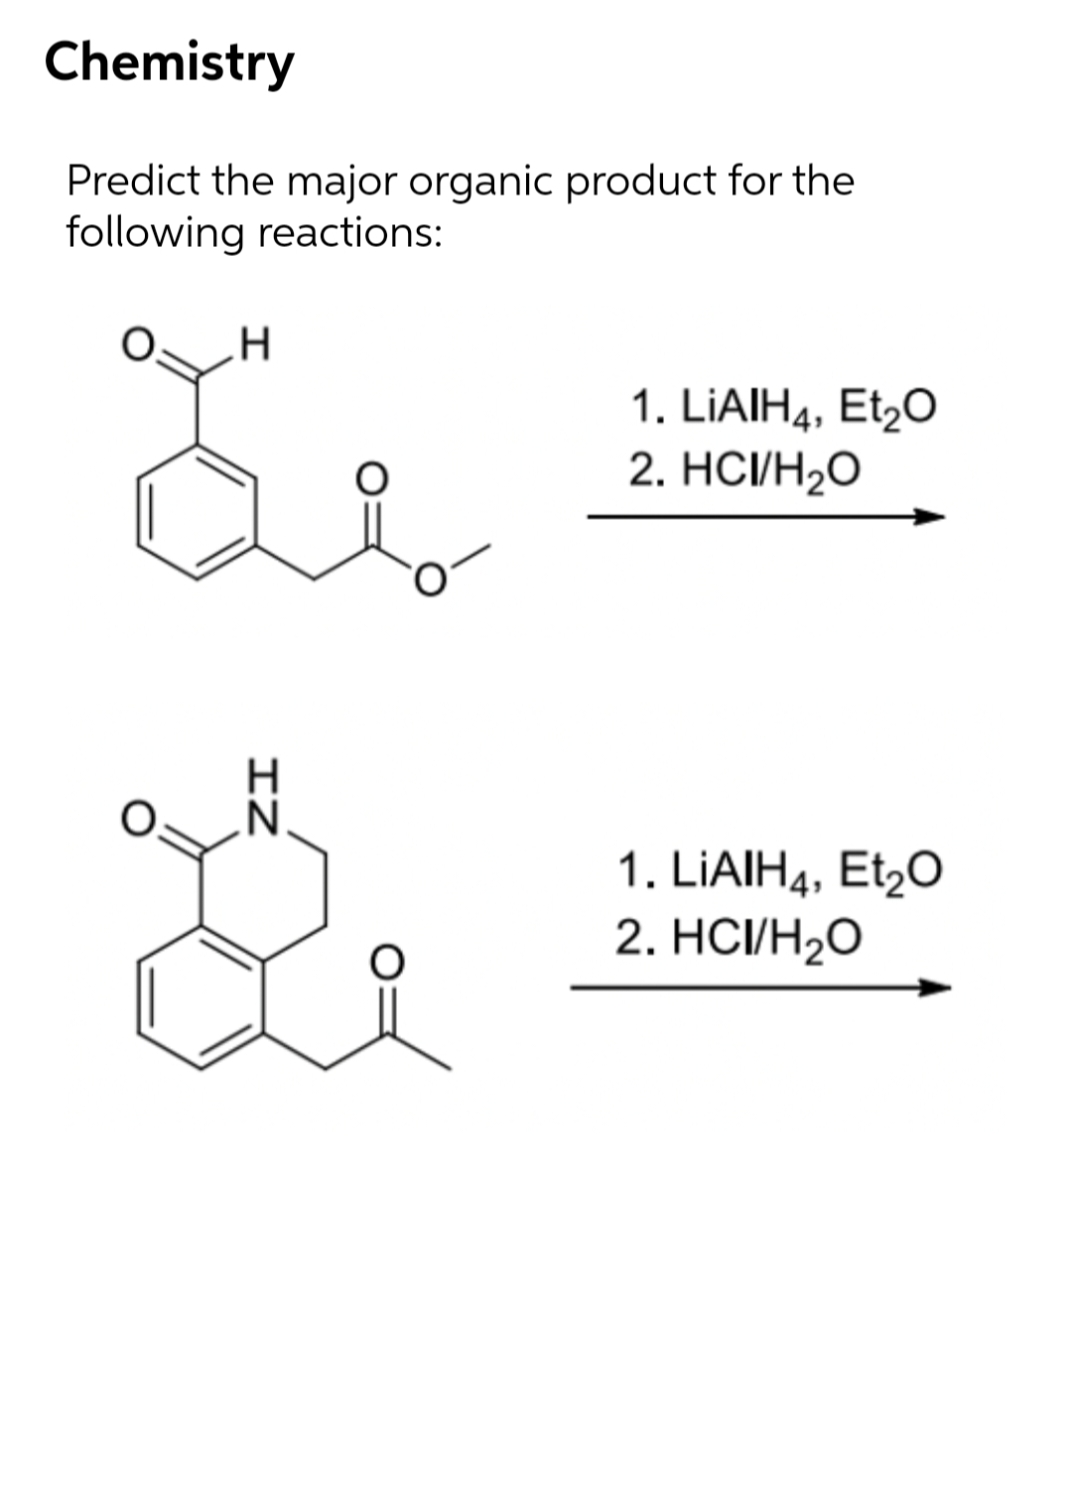 Chemistry
Predict the major organic product for the
following reactions:
1. LIAIH4, Et,O
2. НСИН-0
1. LIAIH4, Et,0
2. НСИН,0
IZ
